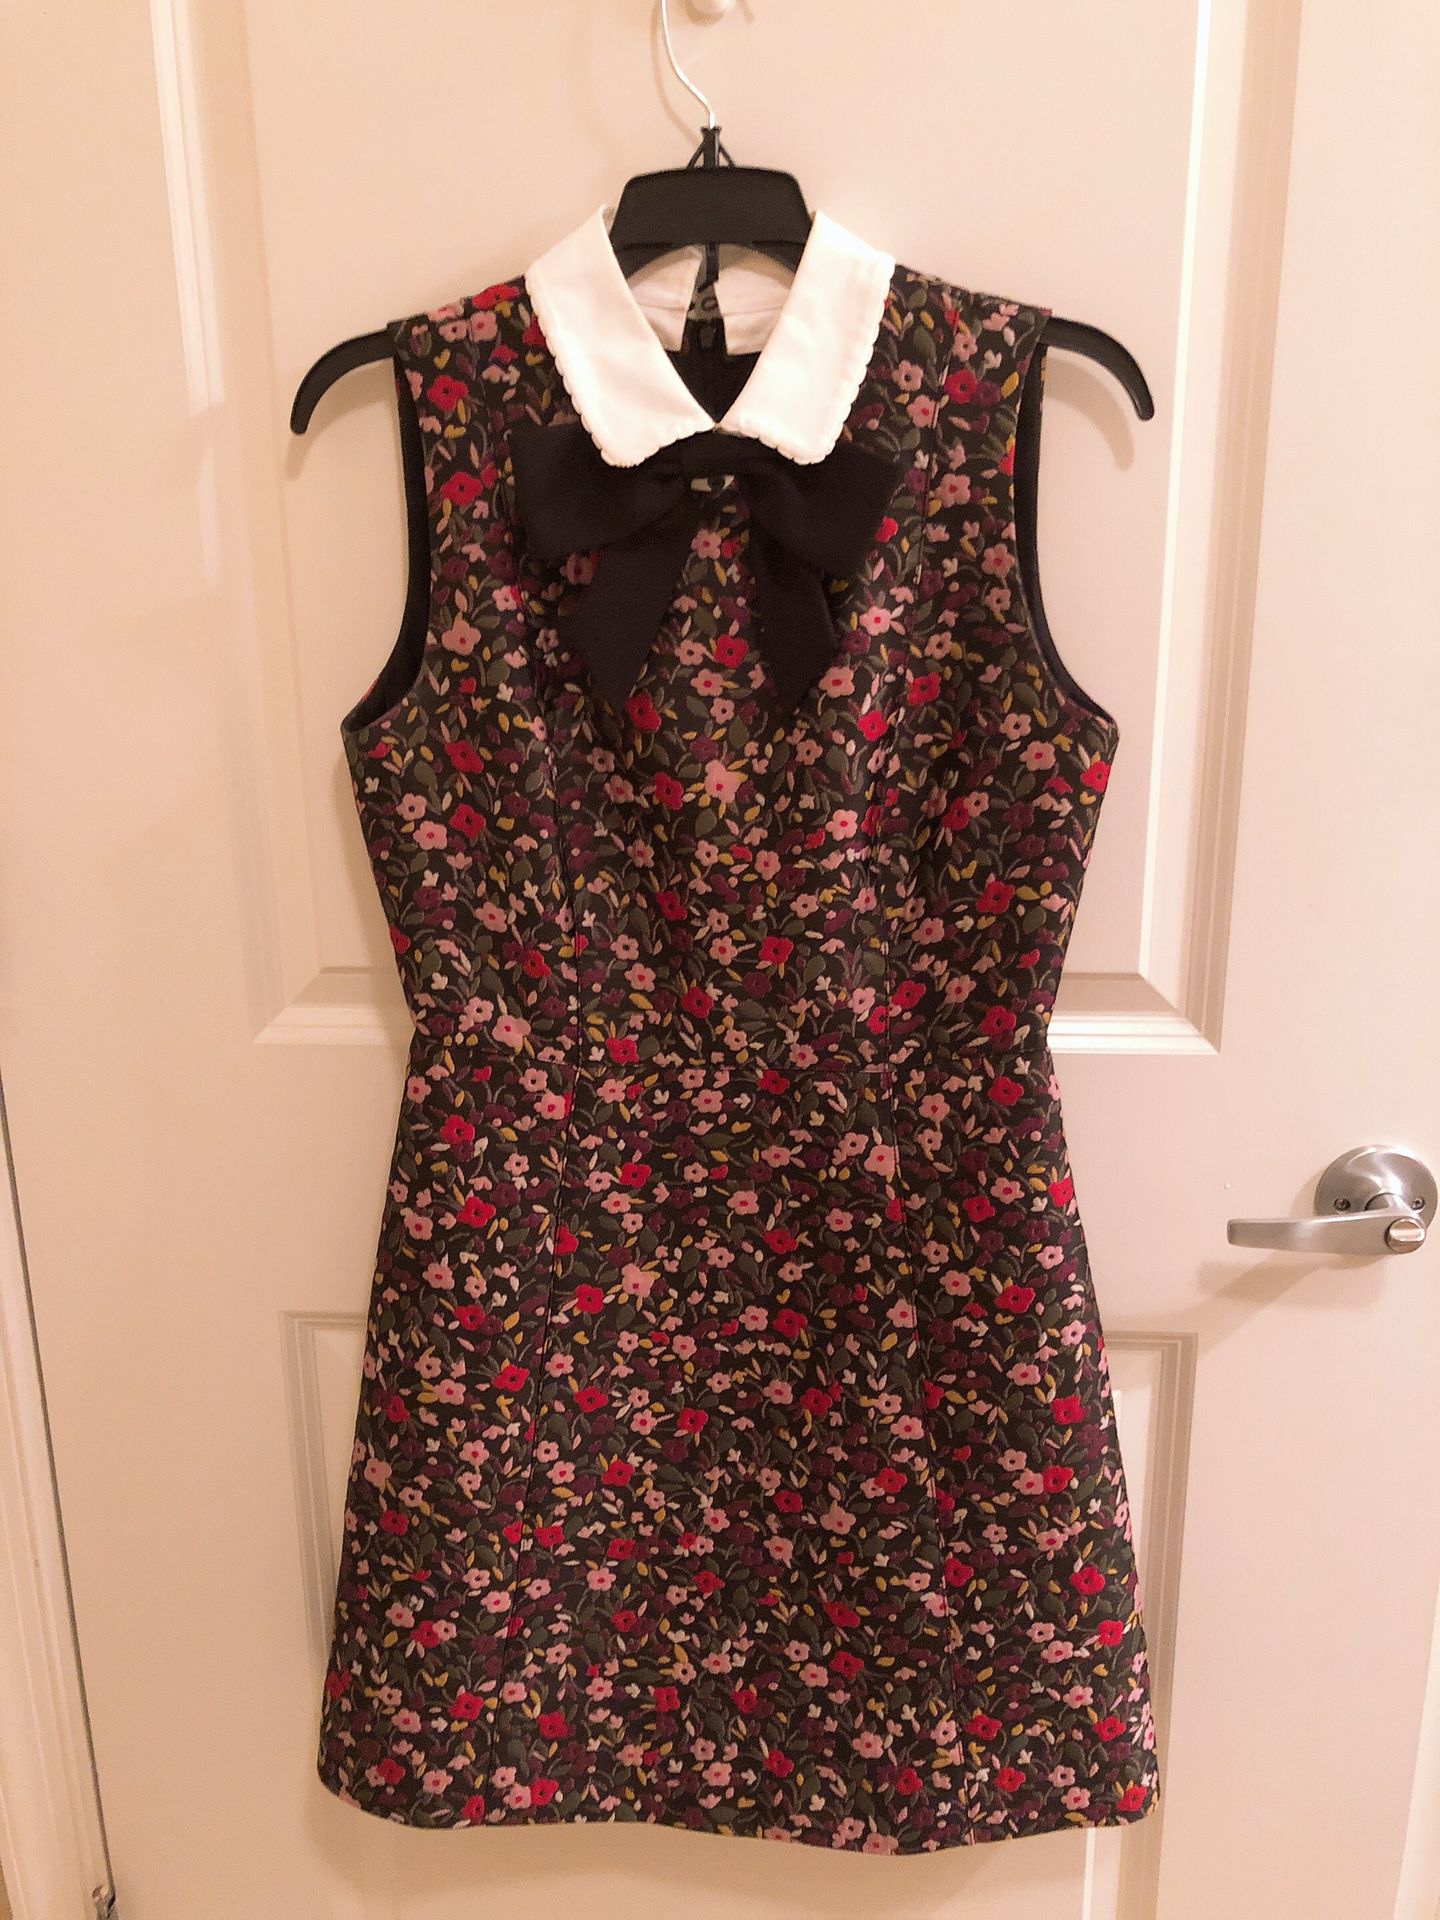 Kate spade embroidery floral dress size 4